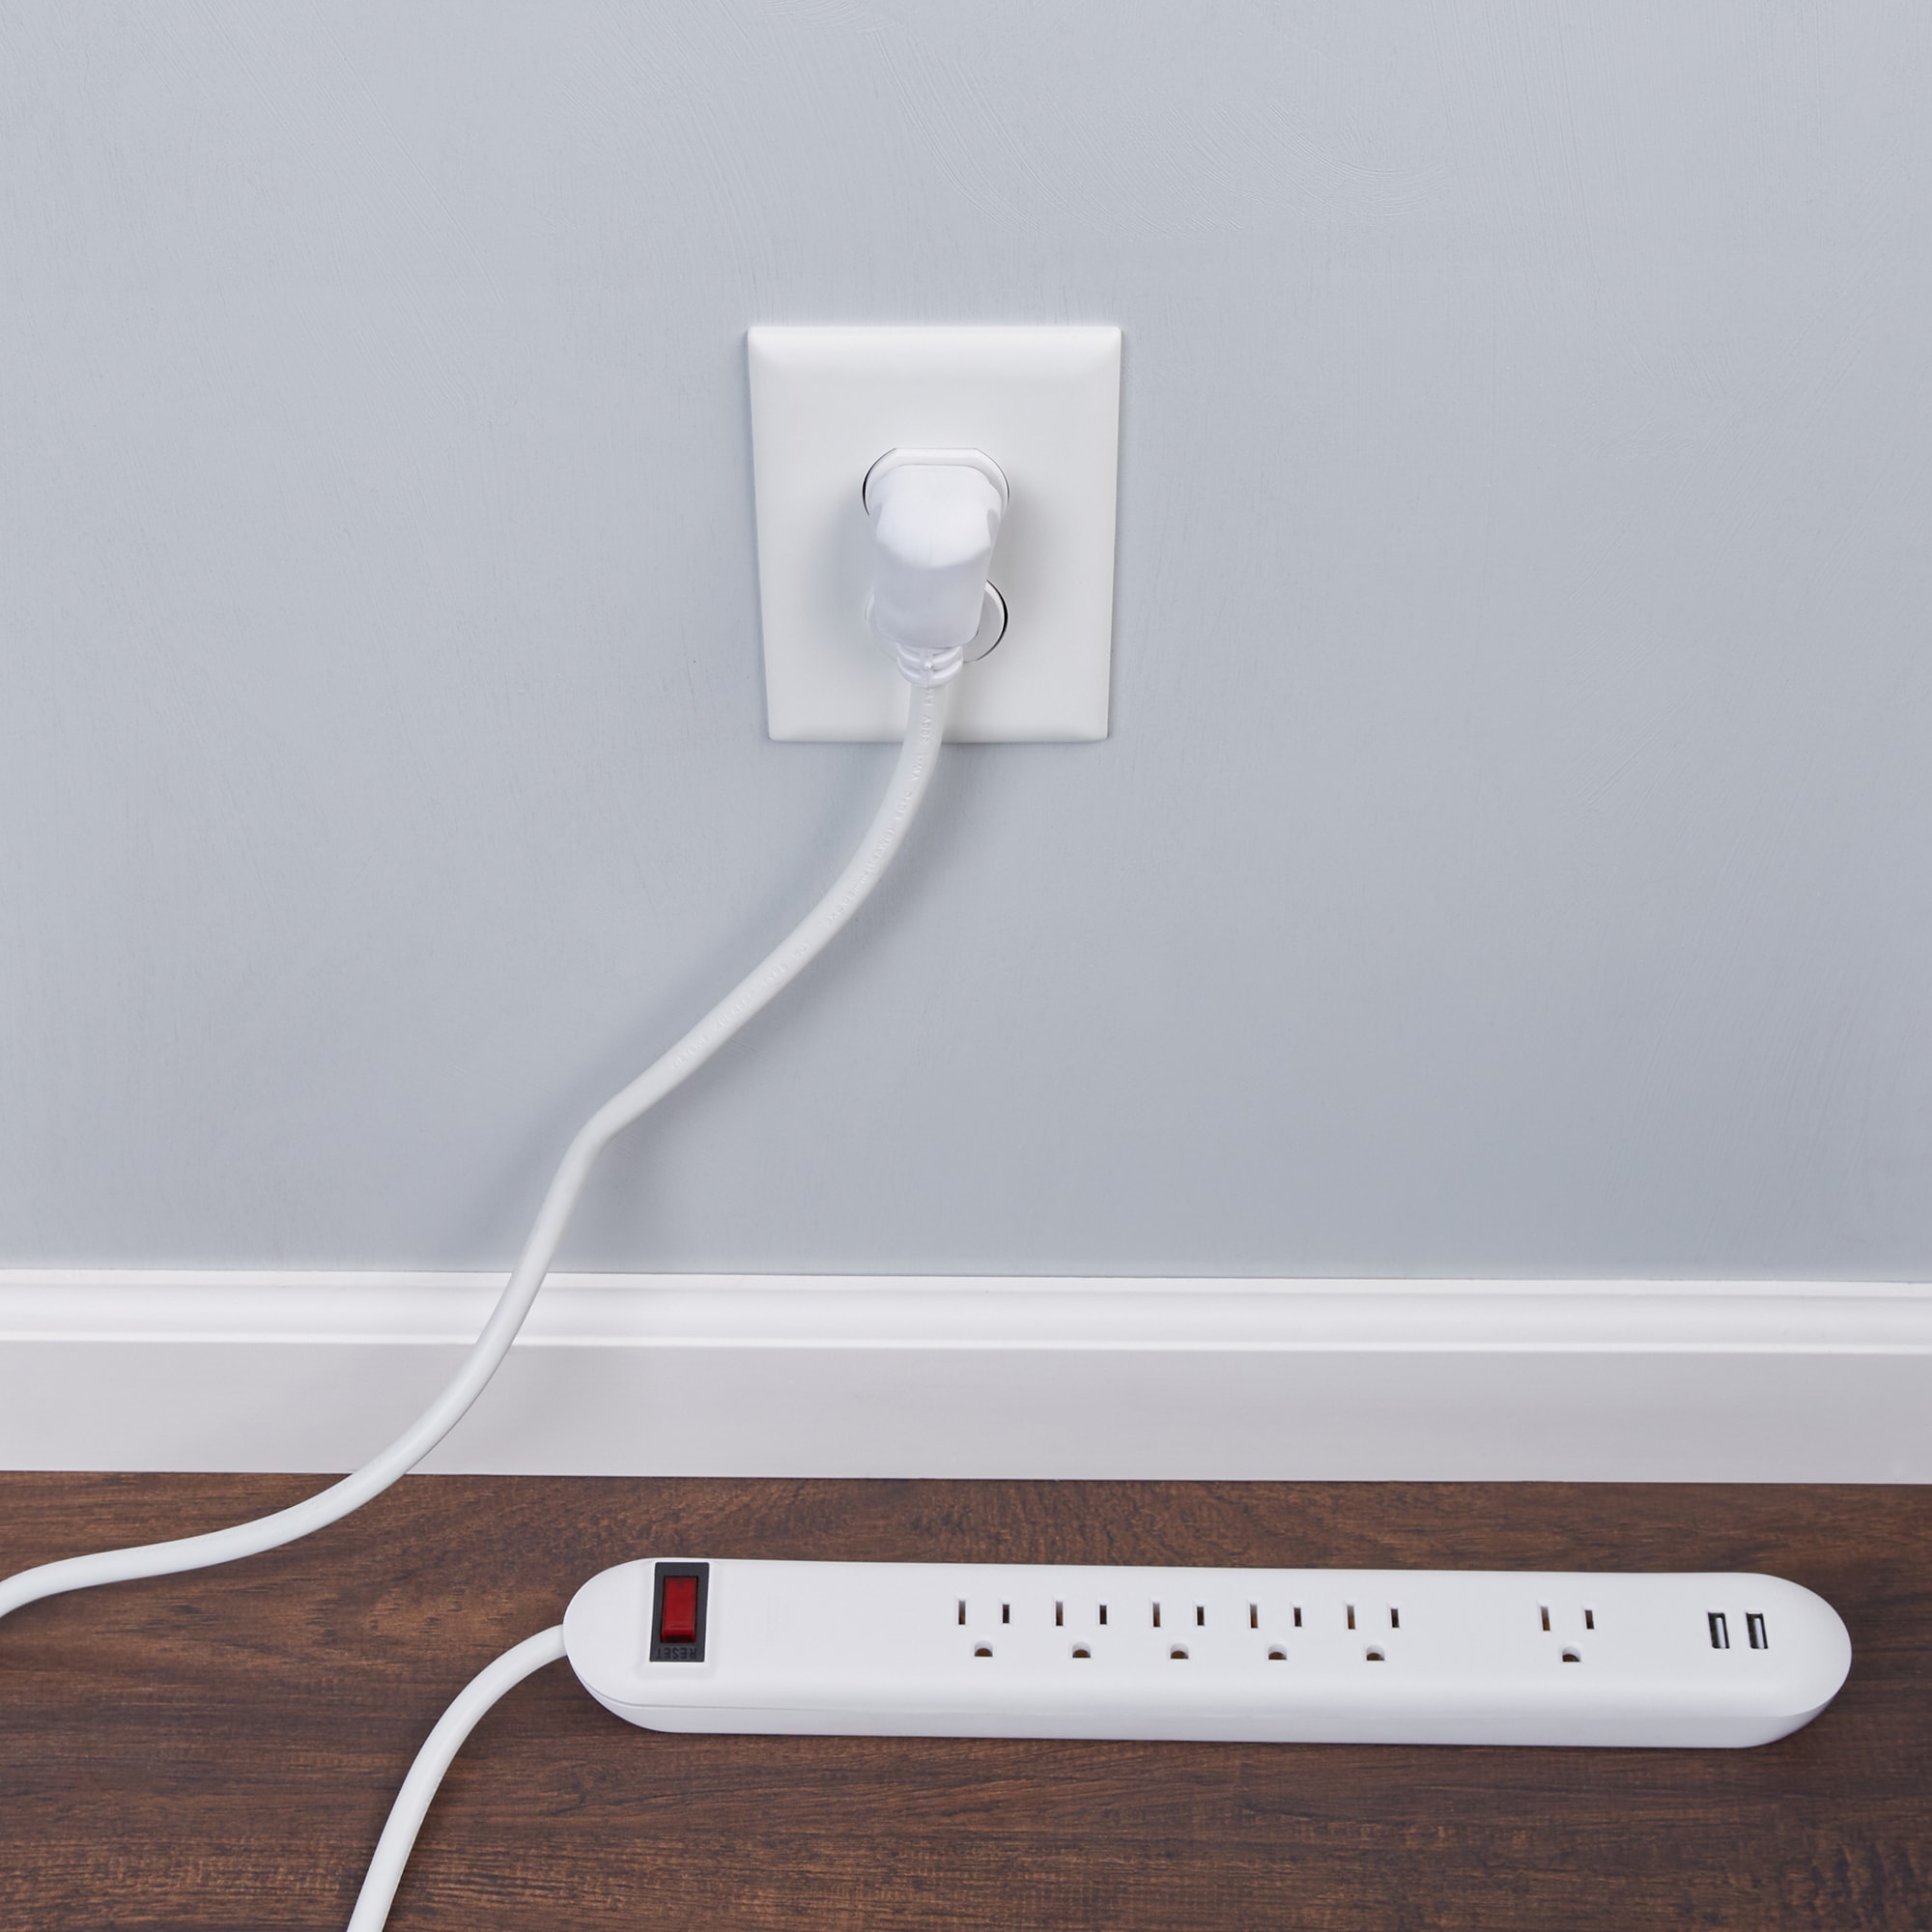 Woods 6-Outlet 3' Cord Surge Protector - Midwest Technology Products